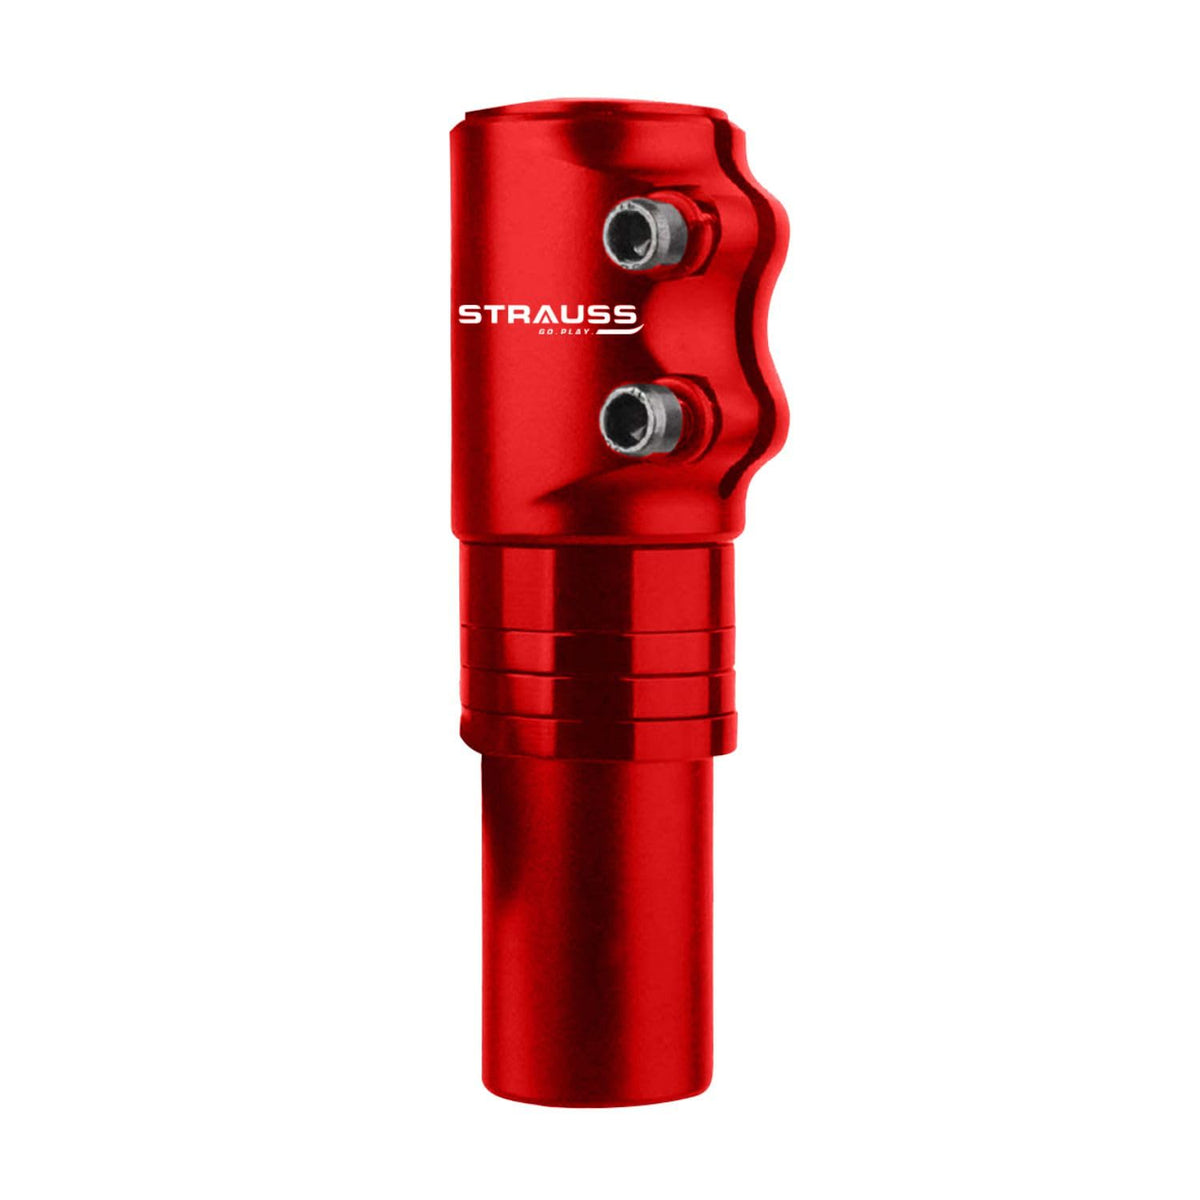 STRAUSS Cycle Handlebar | Cycle Heads Up Stem Riser Adaptor | Cycle Handle Extension | Cycle Accessories | Adjustable Cycle Handle Bar Stem Raiser | Enhanced Control and Stability, (Red)